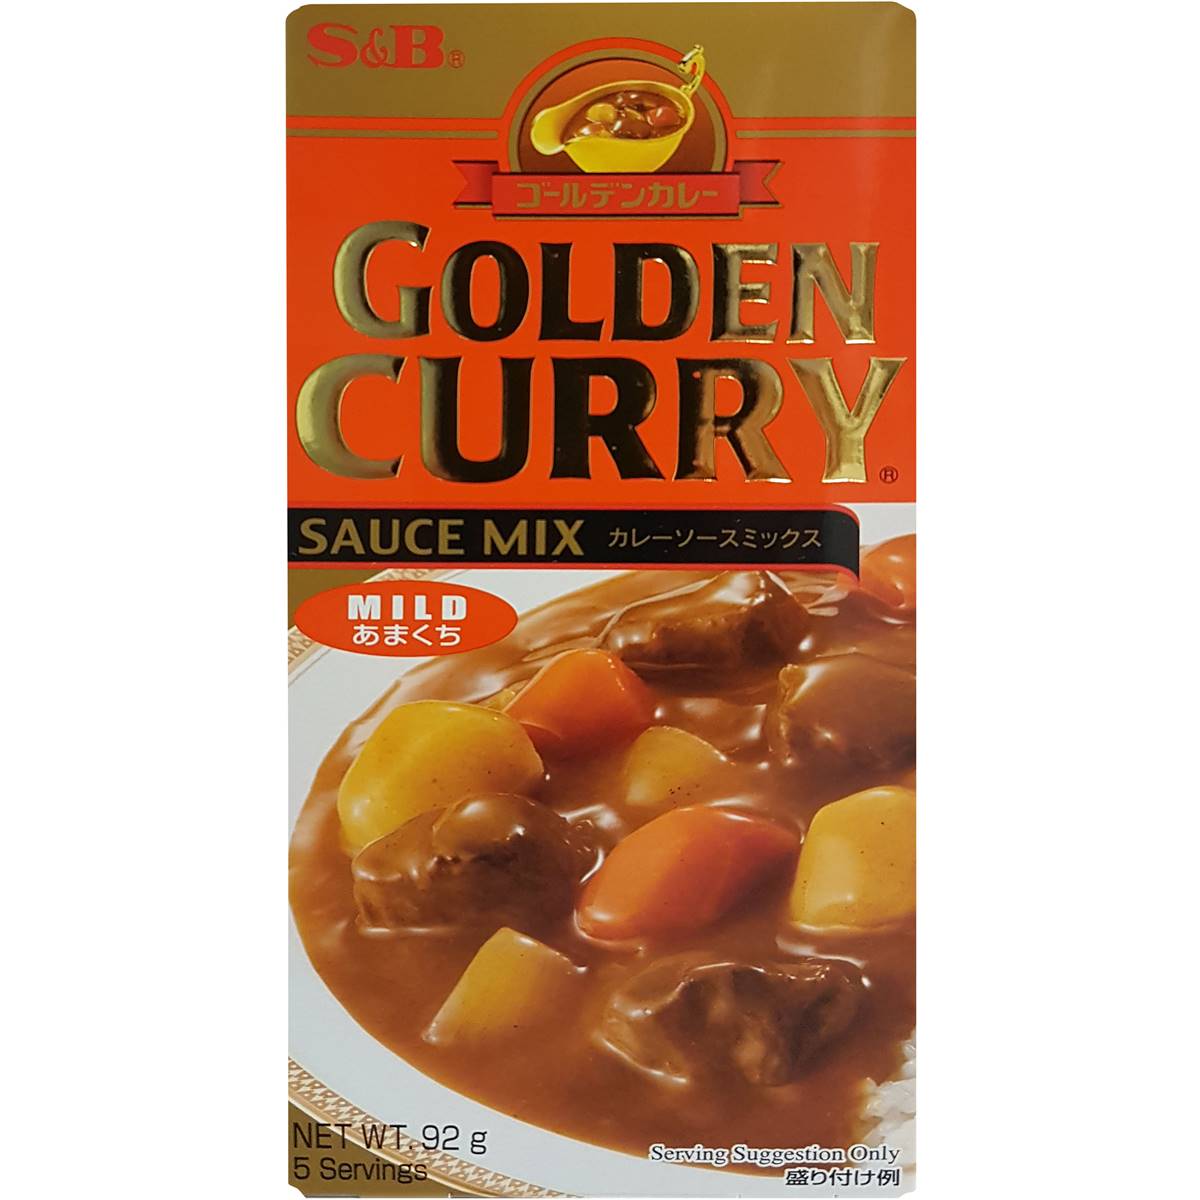 Calories in S&b Golden Curry Mix Mild